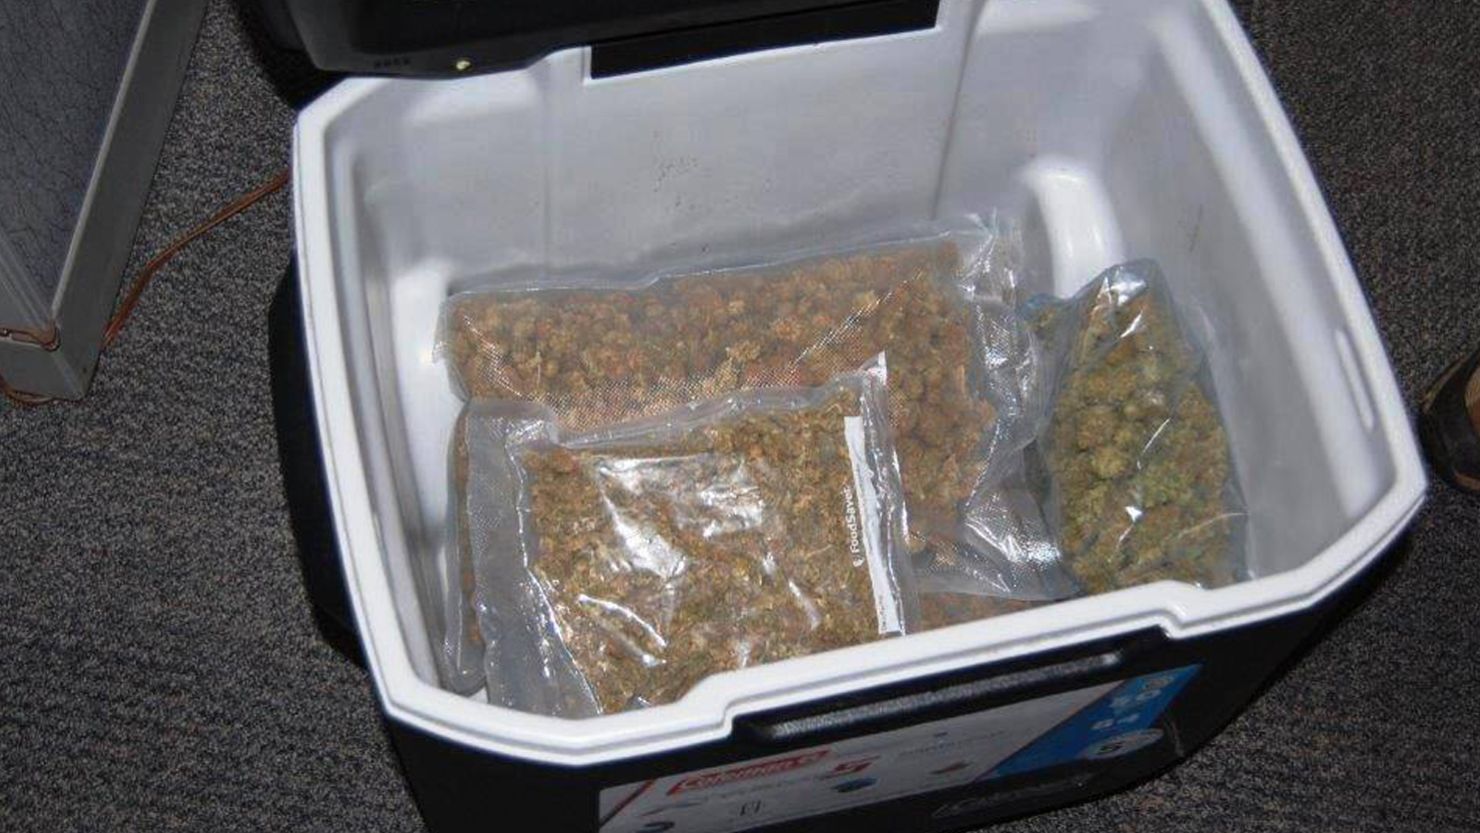 Employees discovered the marijuana while sorting donations.